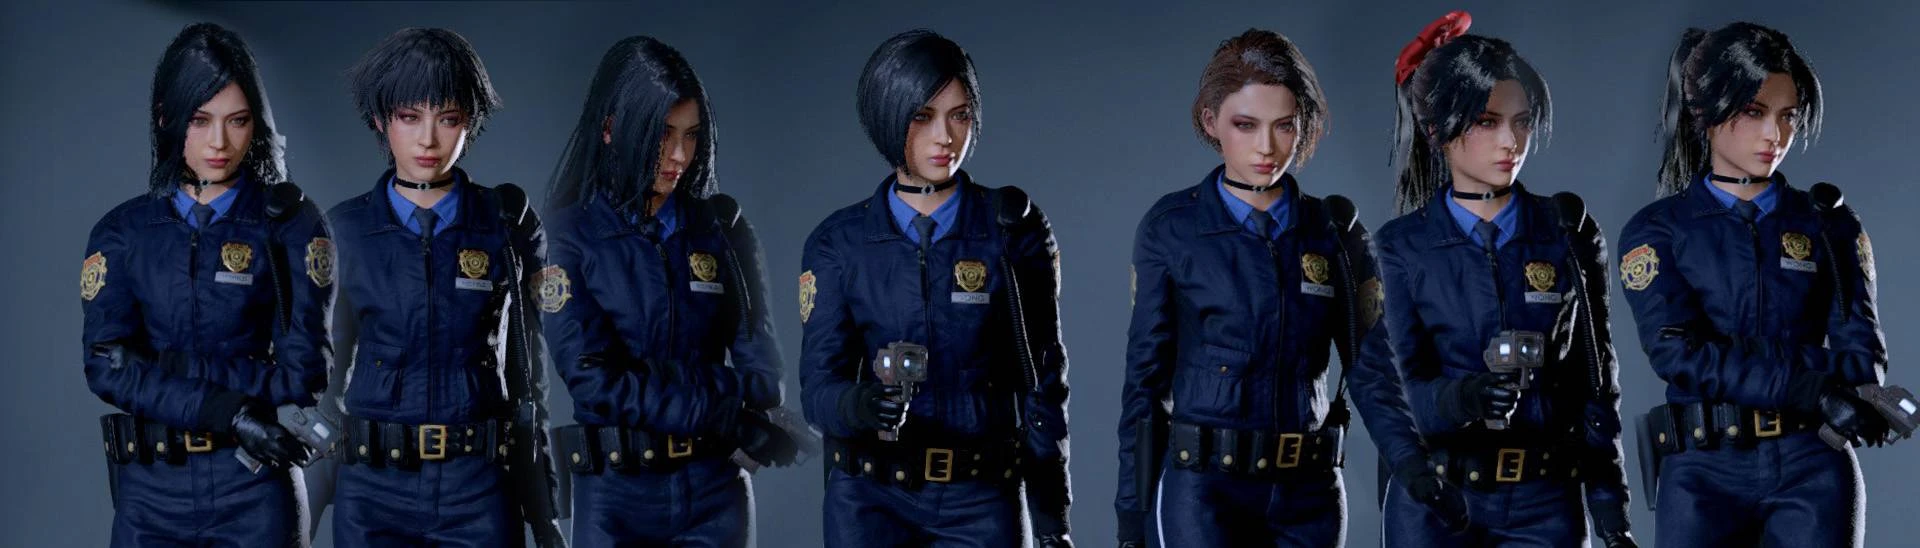 Singapore Police Force - Goodbye, hair and welcome Police National Service!  | Facebook